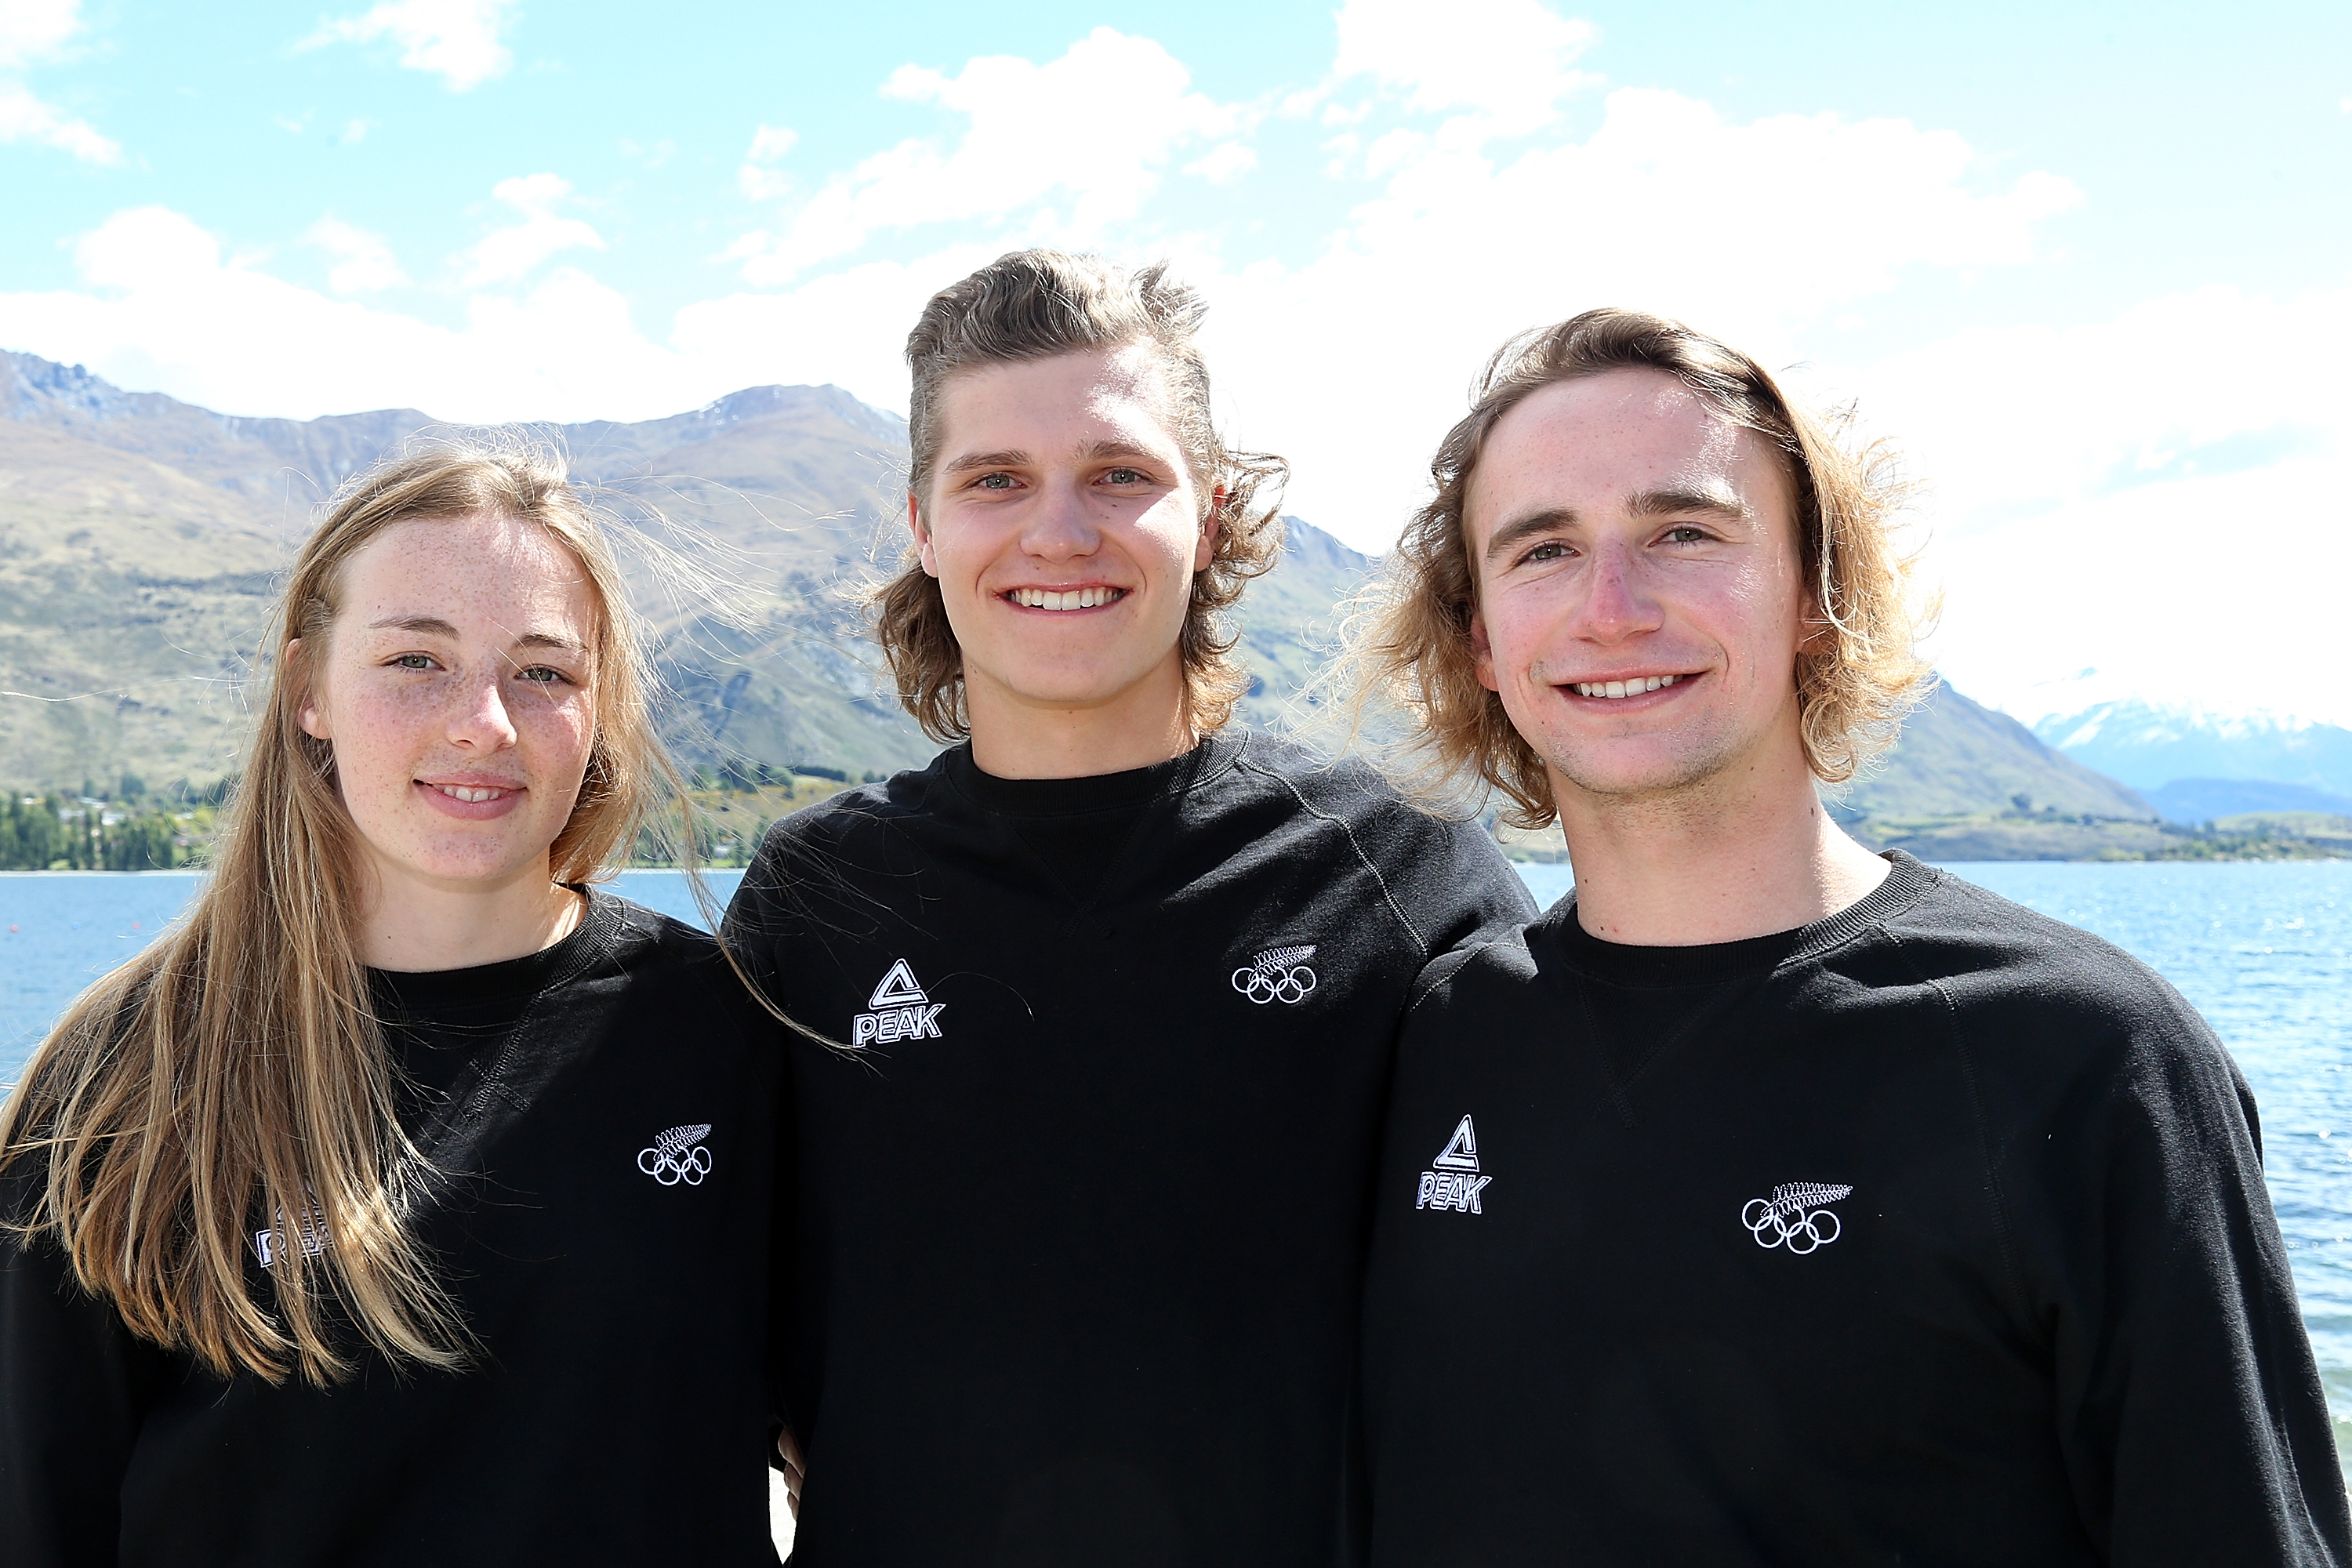 New Zealand Athletes In Peak Condition With Just 100 Days To Olympic